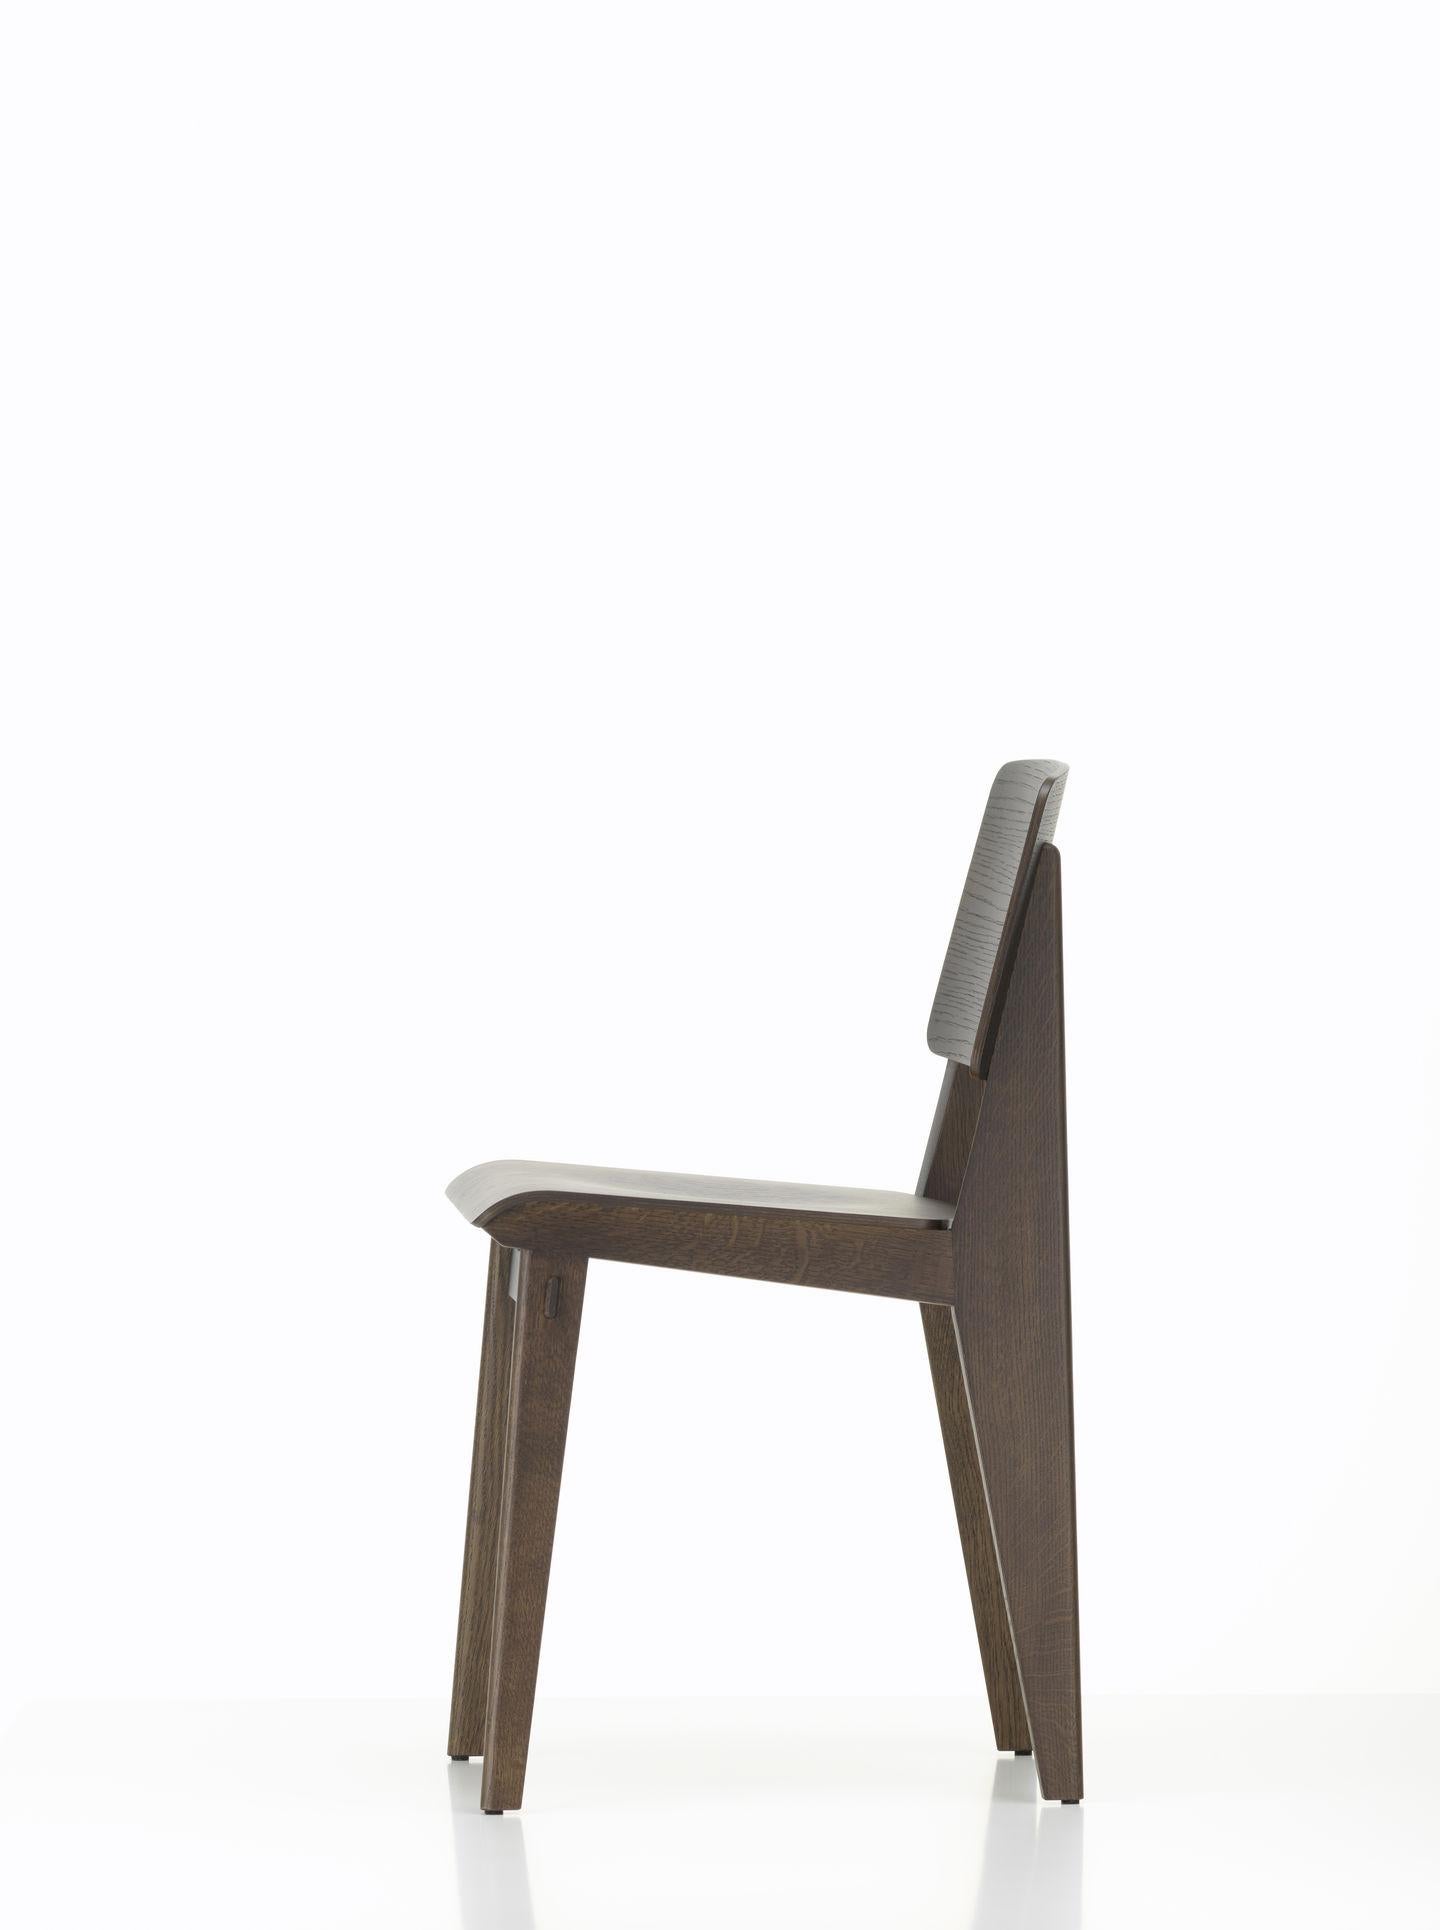 Jean Prouvé Dark-Stained Oak Chaise Tout Bois Chair by Vitra 8